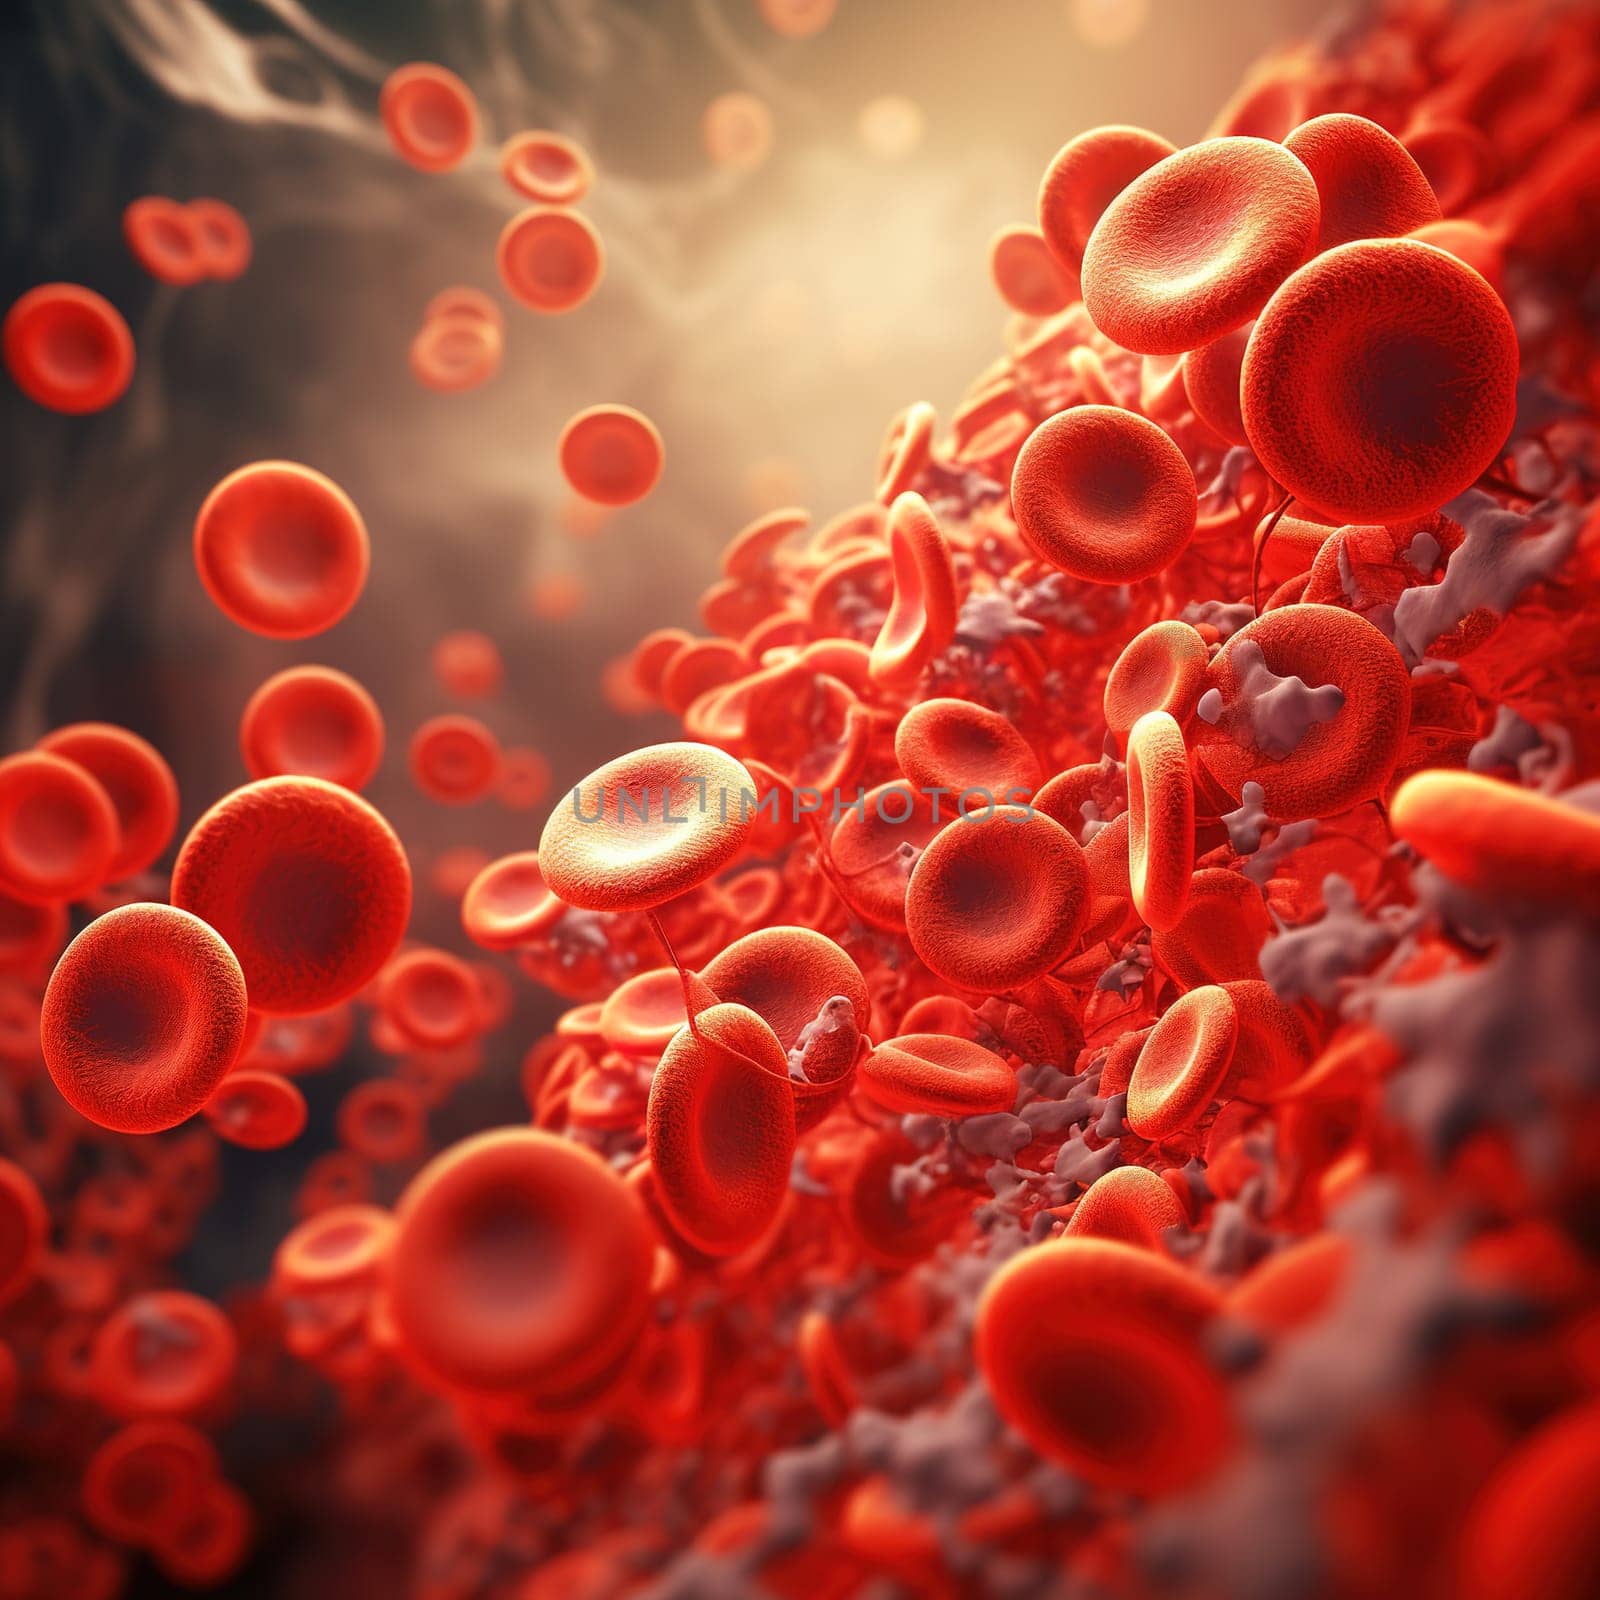 Detail to a red blood cells in the bloodstream of the human, healthcare concept